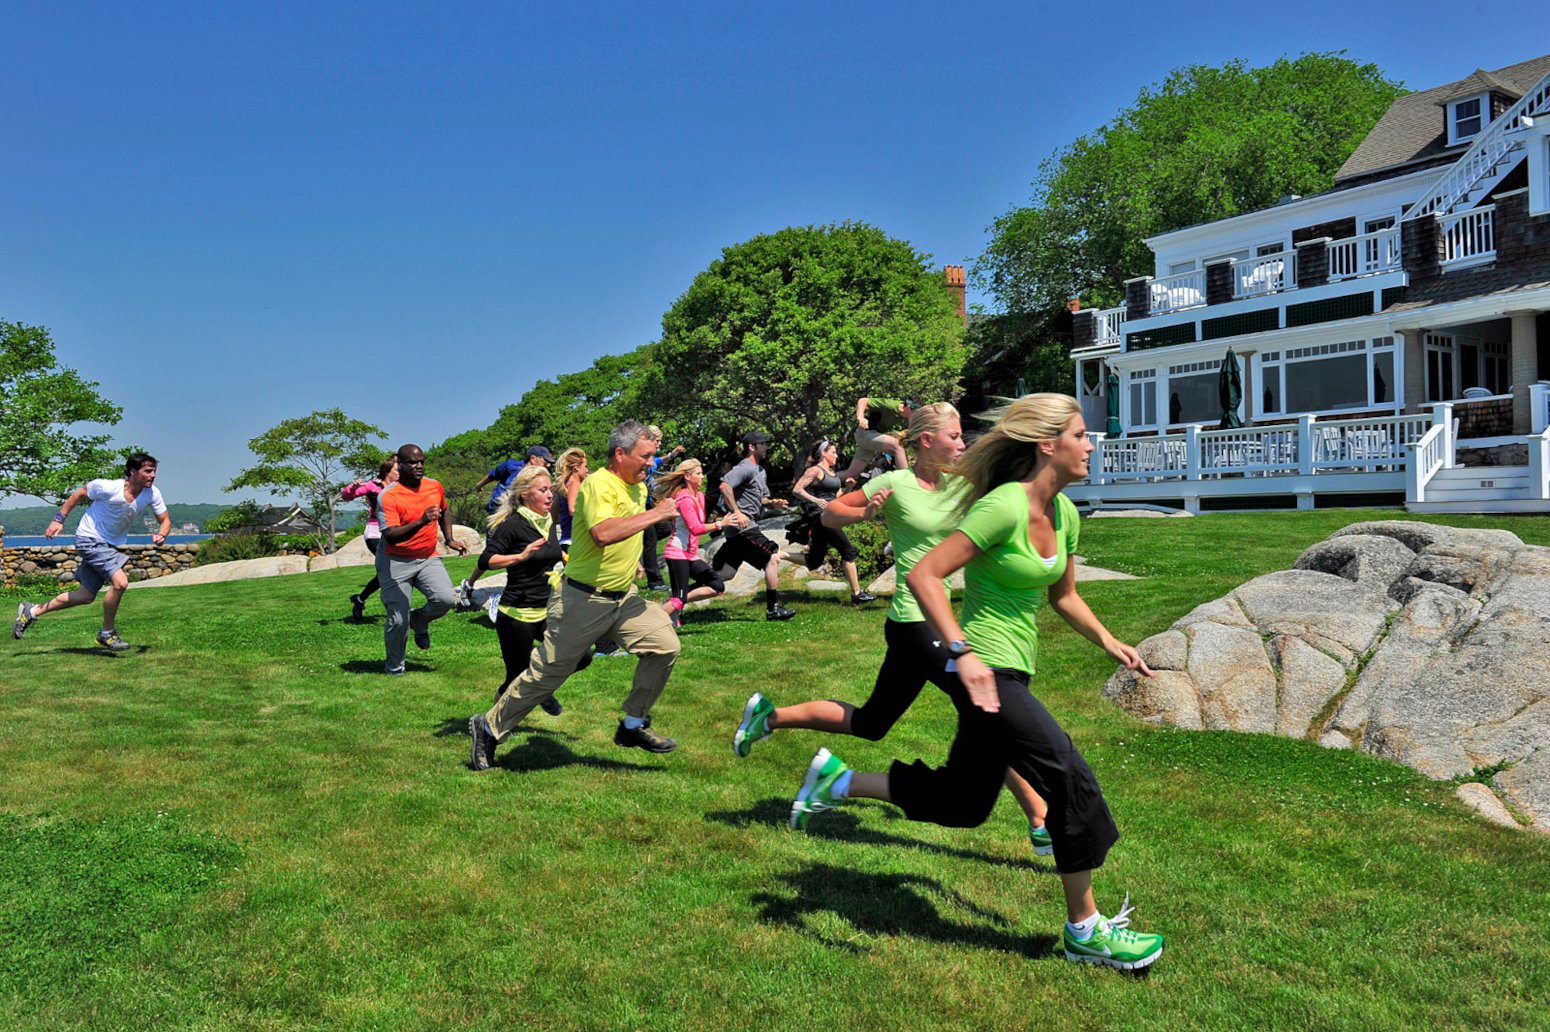 Contestants running during 'The Amazing Race' Season 17.